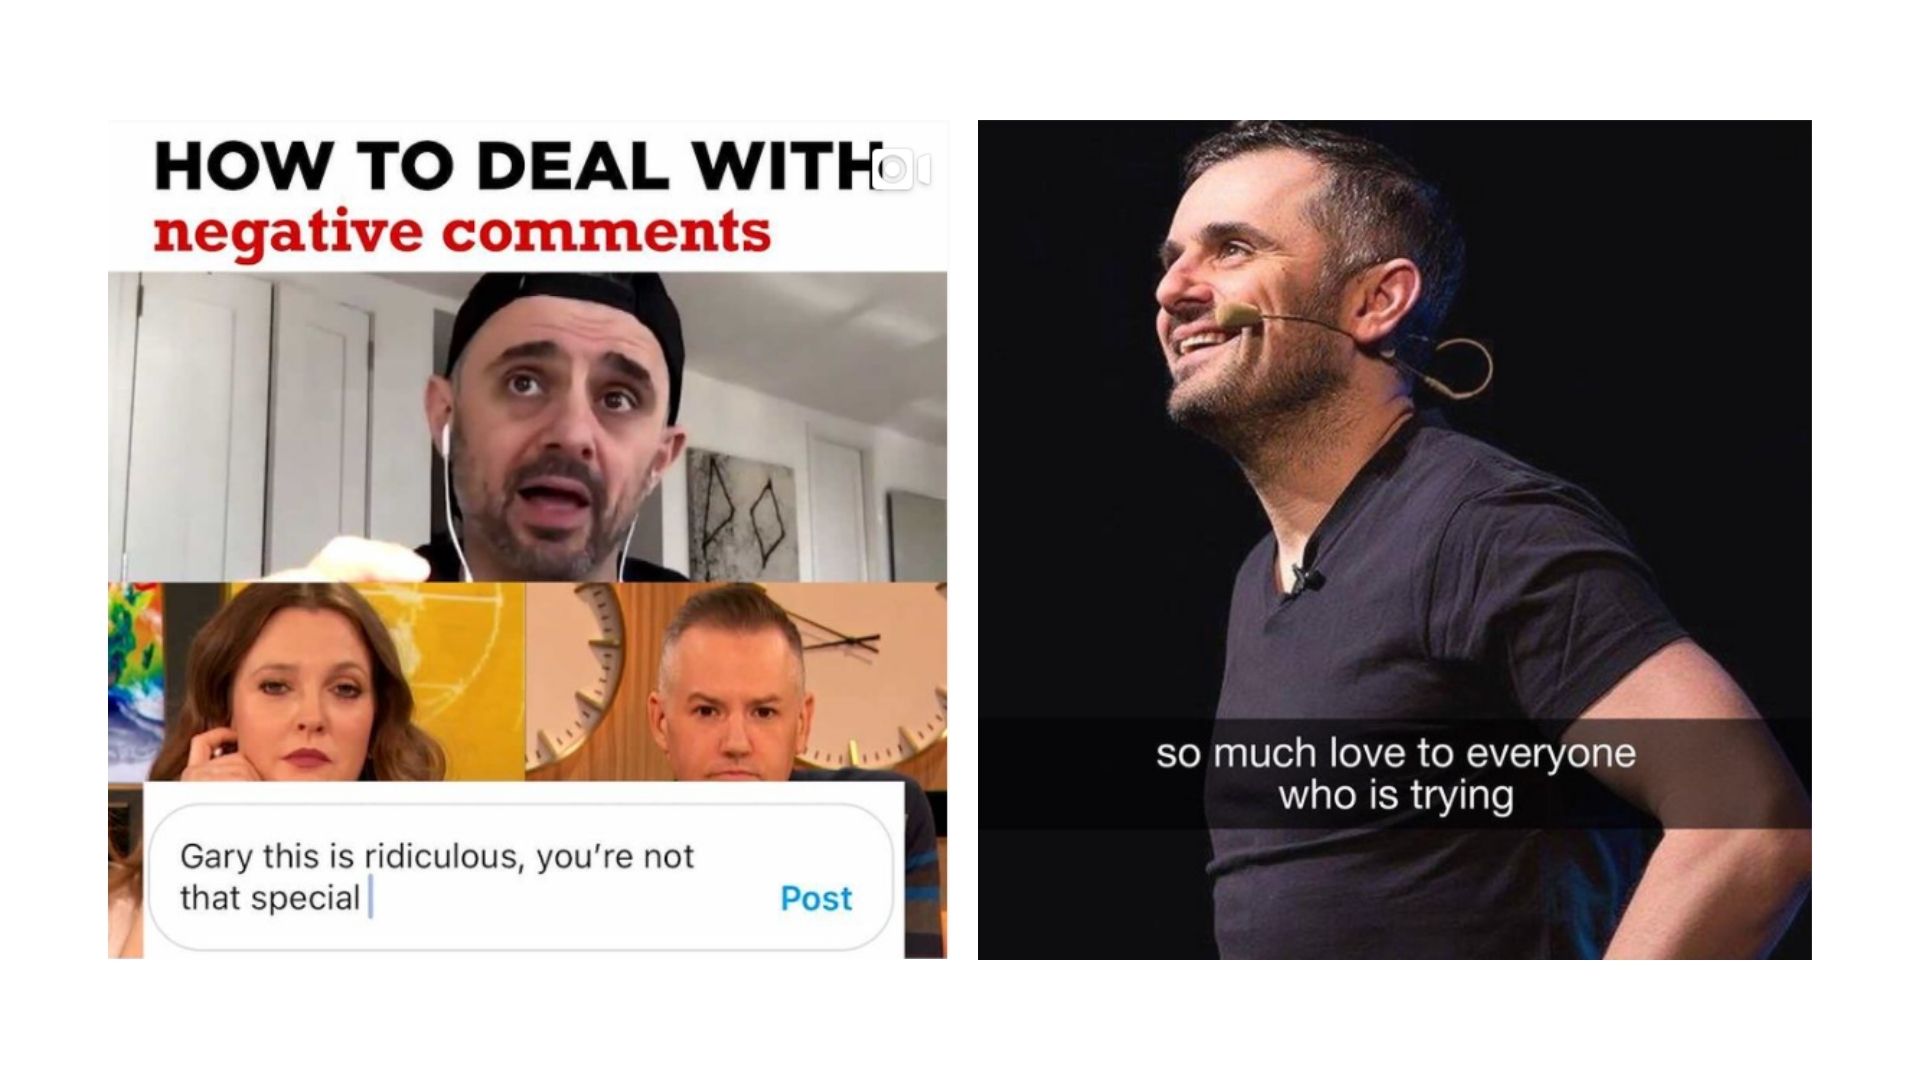 Gary Vaynerchuk - also known as Gary Vee - answers all comments on his social media accounts, no matter how negative. 